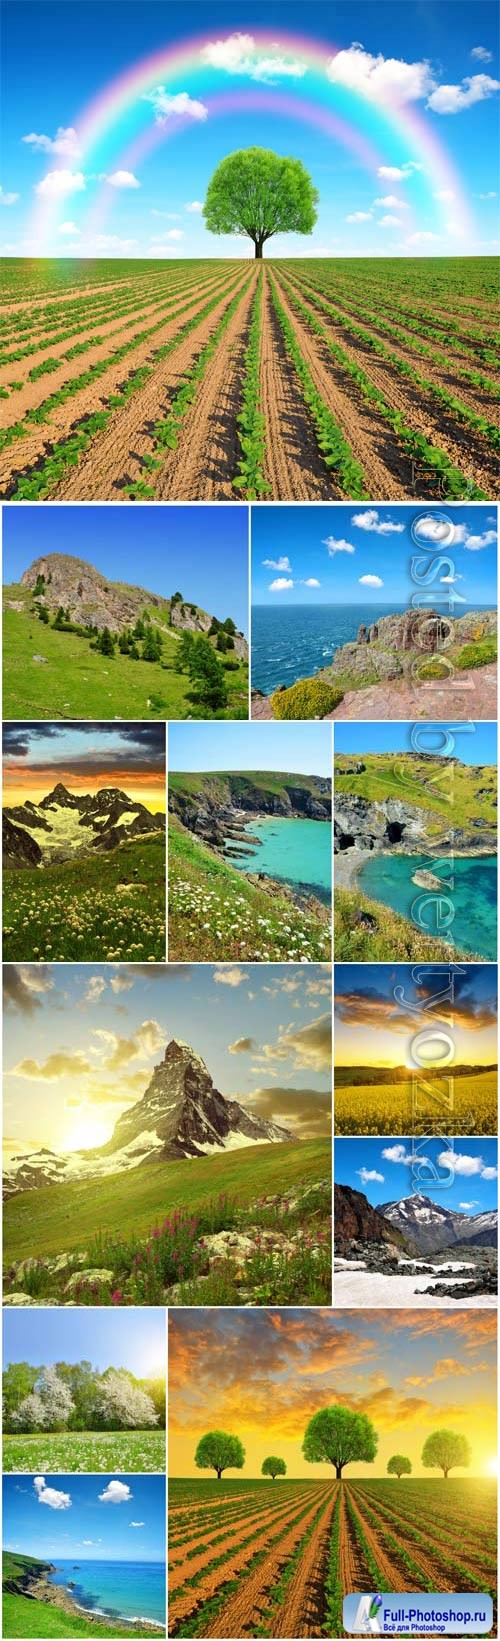 Beautiful nature mountains and meadows stock photo